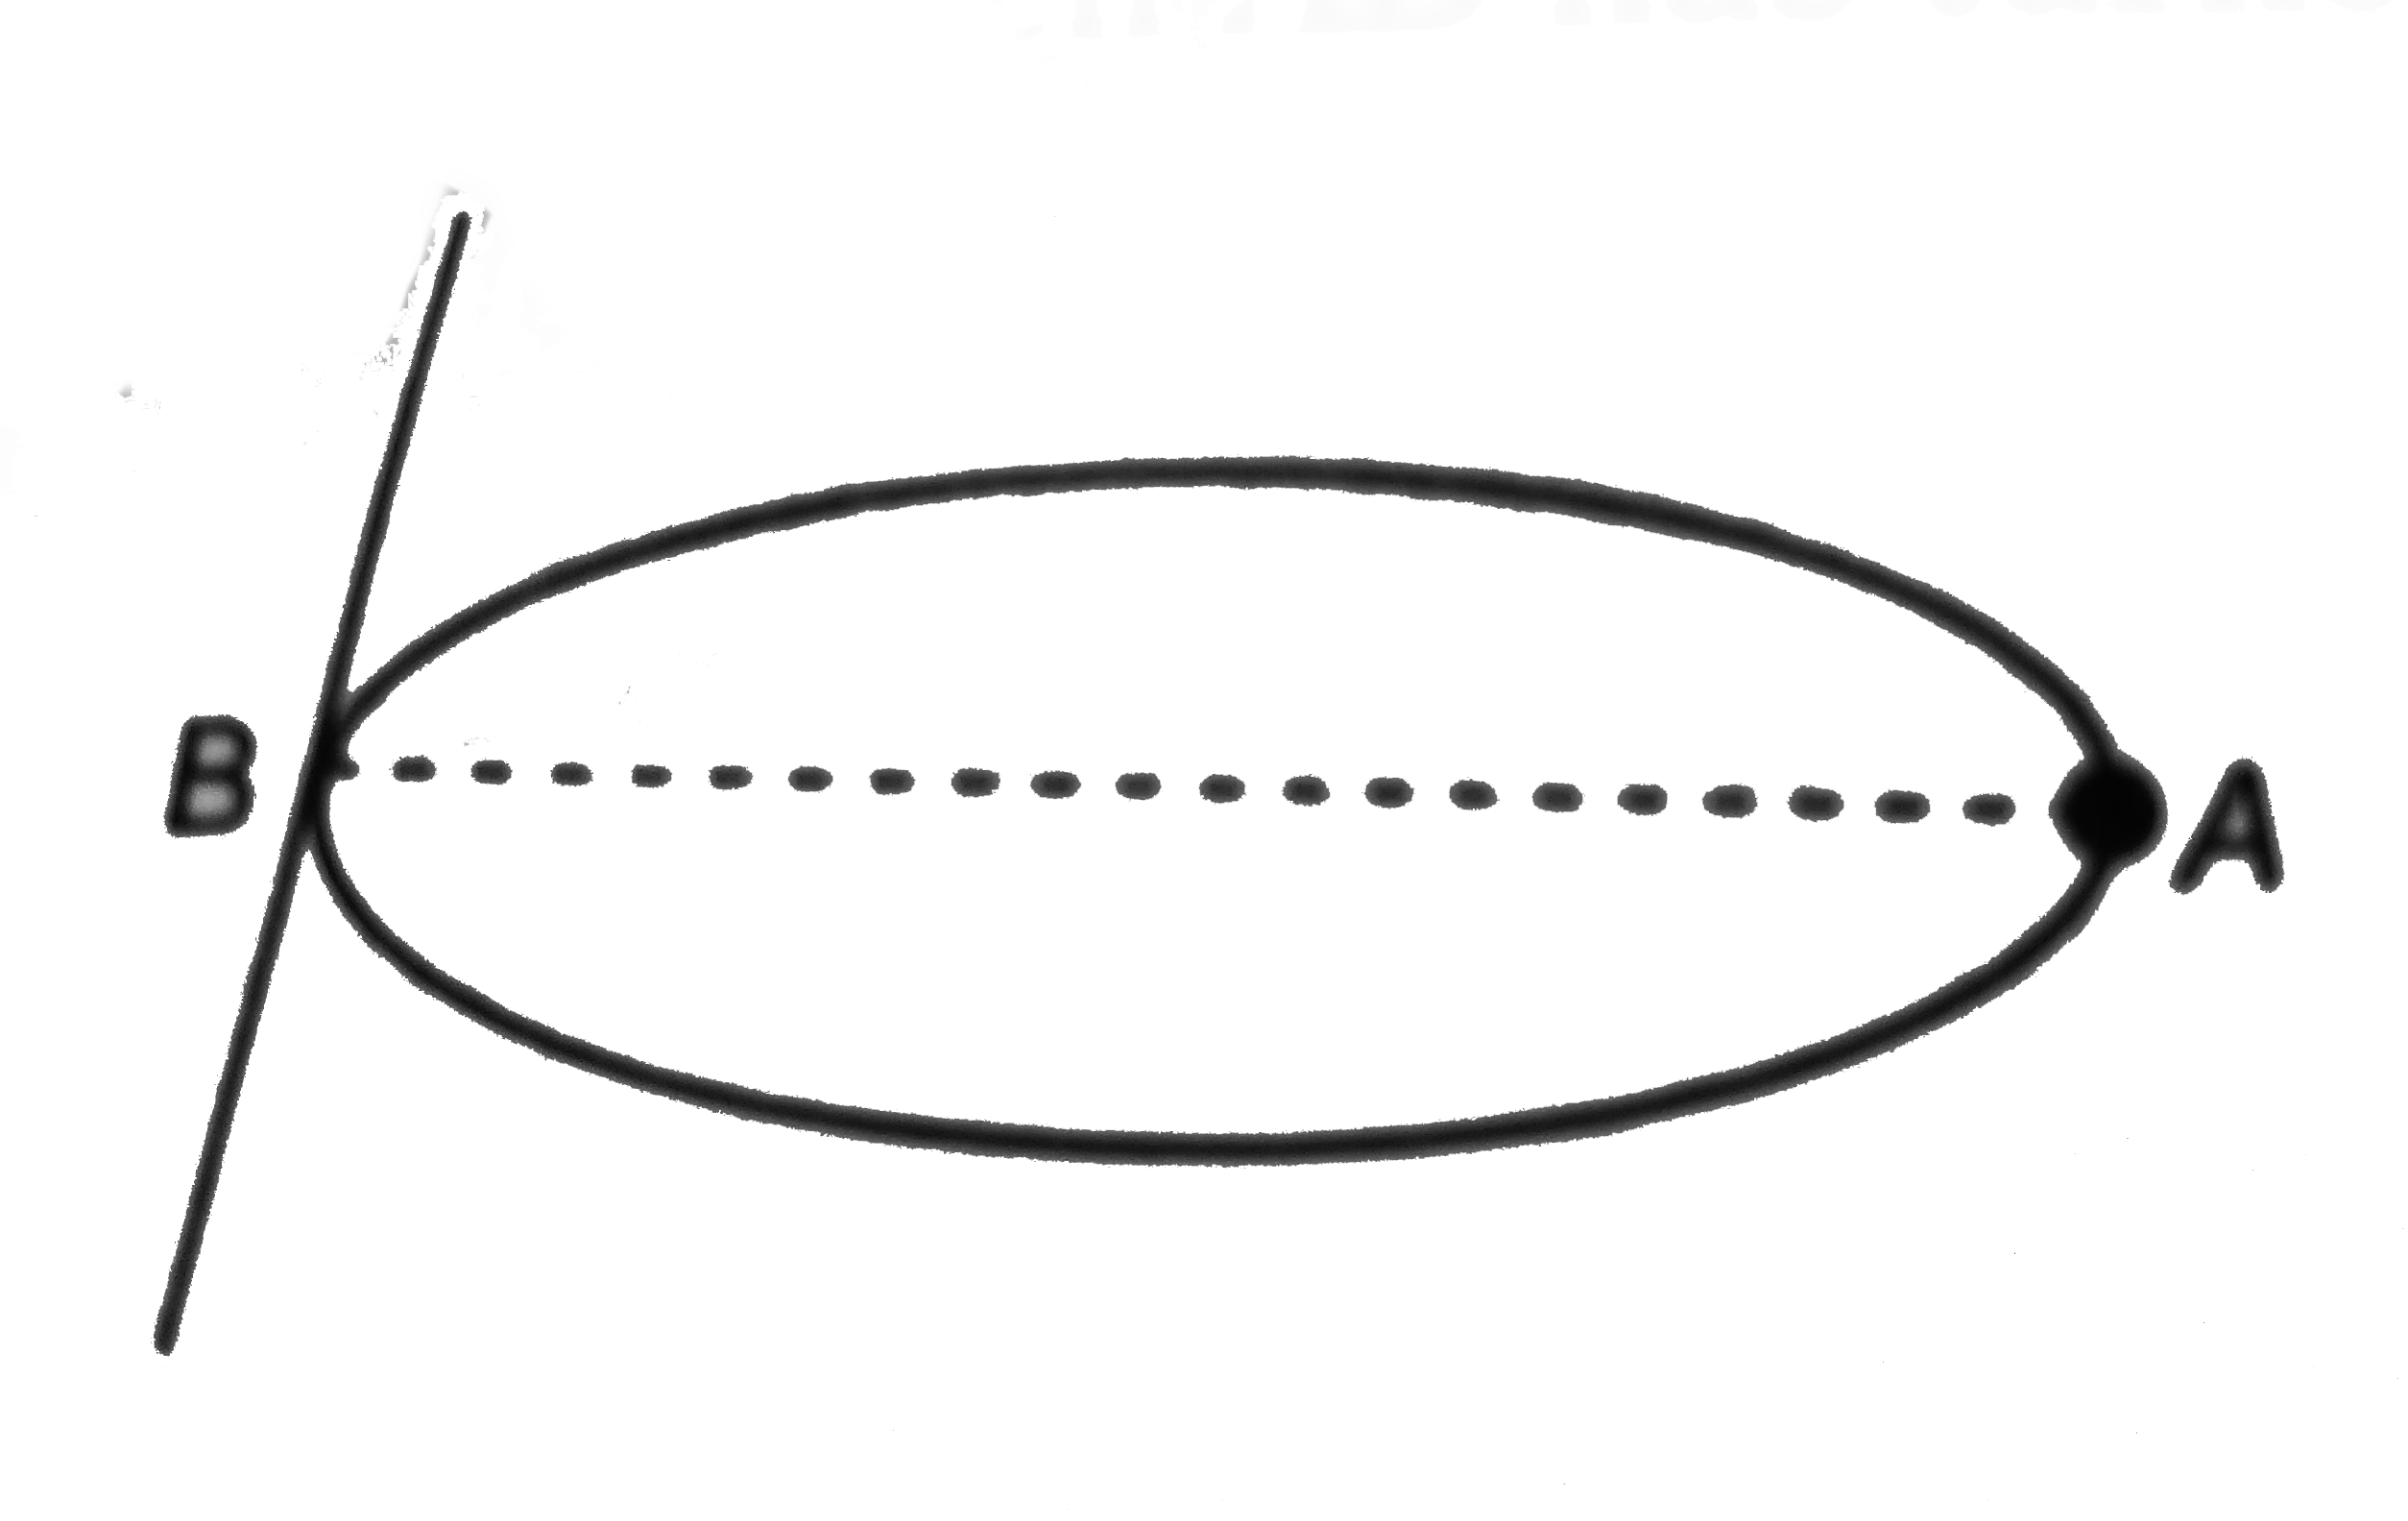 A ring of mass m and radius r has a particle of mass m attached to it at a point A. the ring can rotate about a smooth horizontal axis which is tangential to the ring at a point B diametrically opposite to A. The ring can rotate about a smooth horizontal axis which is tangential to the ring at a point B diametrically opposite to A. The ring is released from rest when AB is horizontal. find the angular veloicity and the angular acceleration of the body when AB has turned through an angle (pi)/(3).